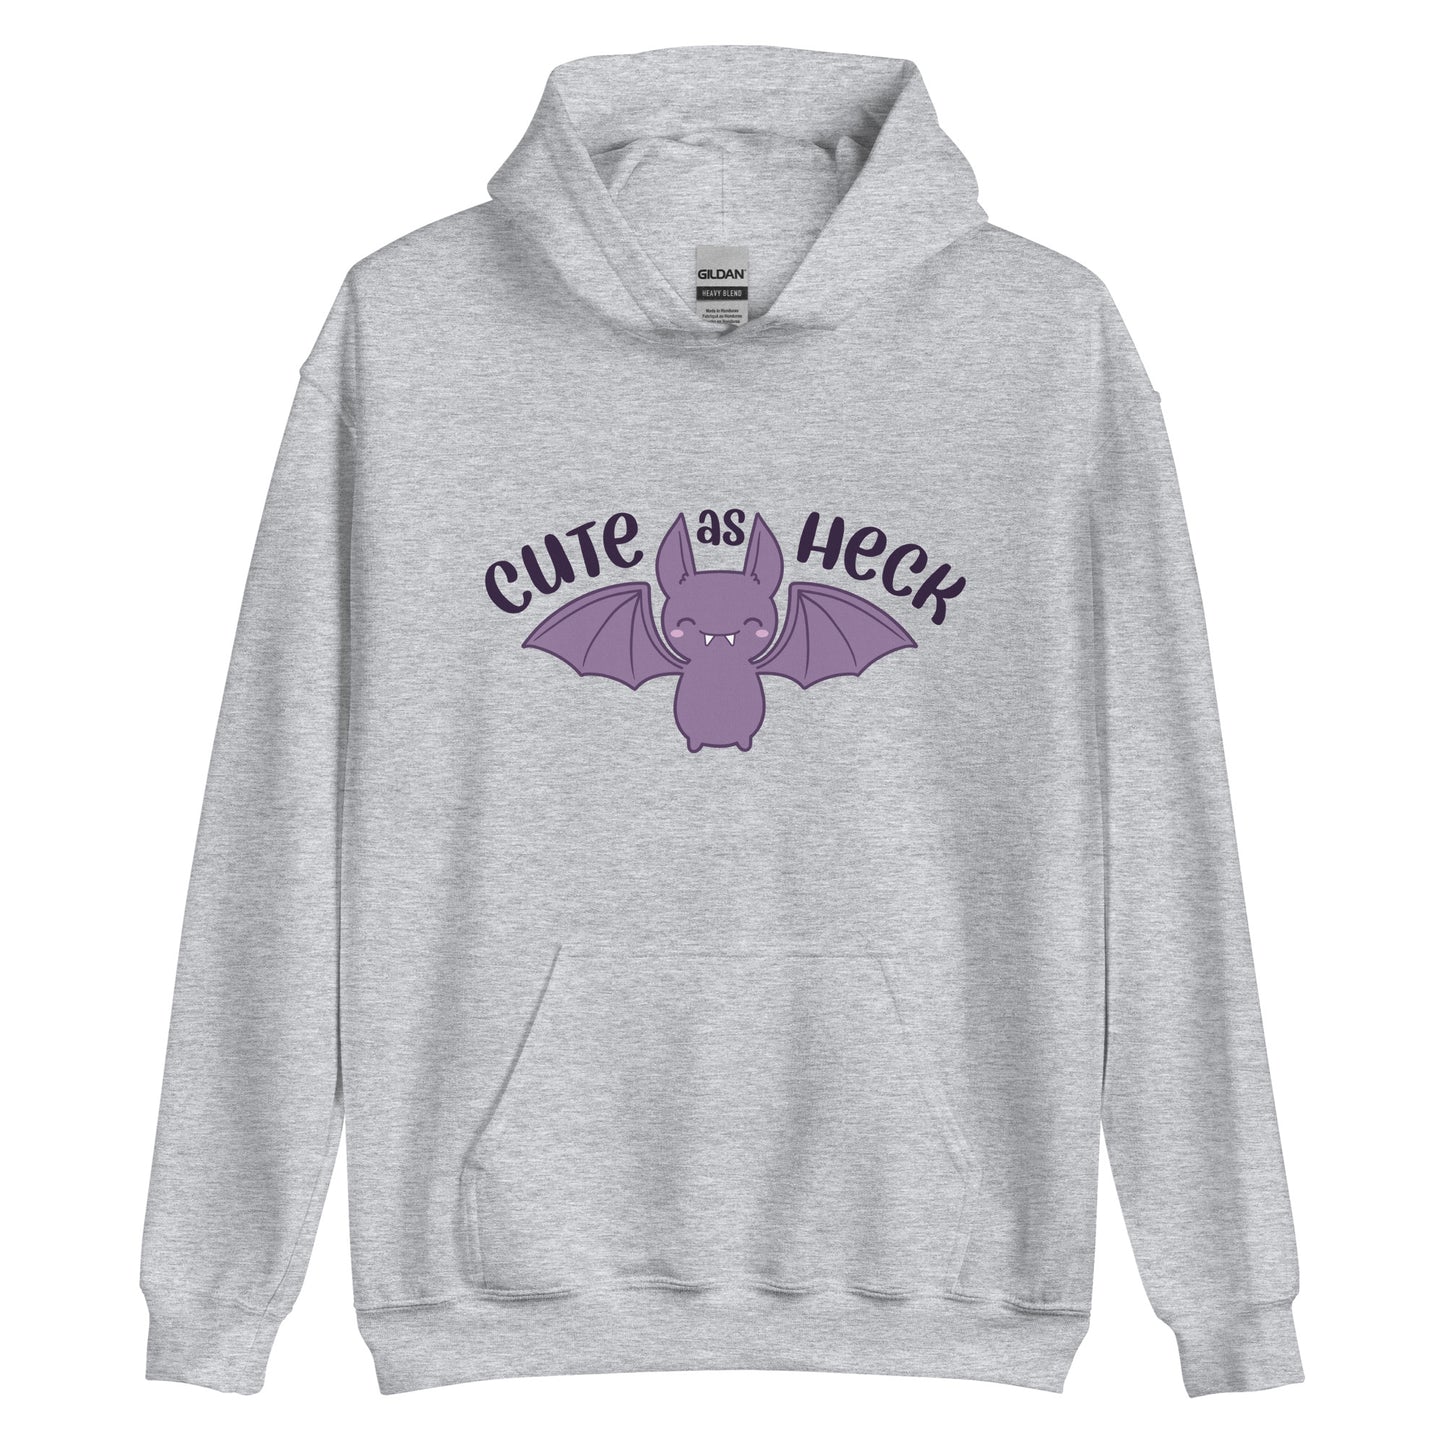 A light grey hooded sweatshirt featuring an illustration of a cute, smiling purple bat. Text above the bat reads "Cute As Heck"